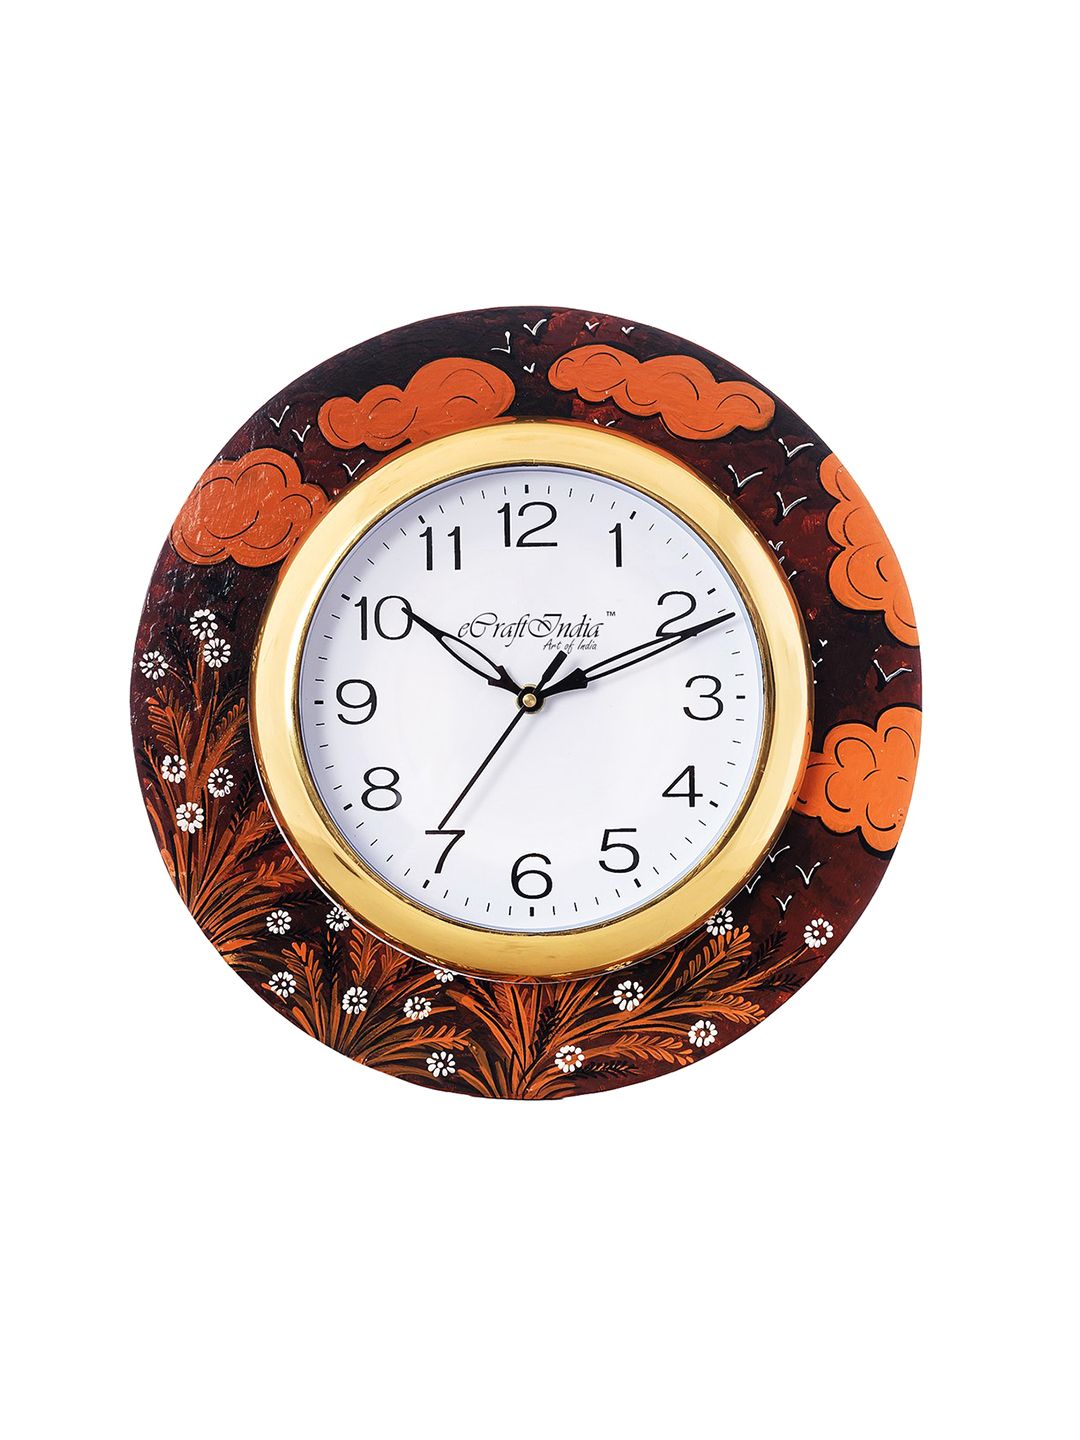 eCraftIndia White Dial Wooden 30.734 cm Handcrafted Analogue Wall Clock Price in India